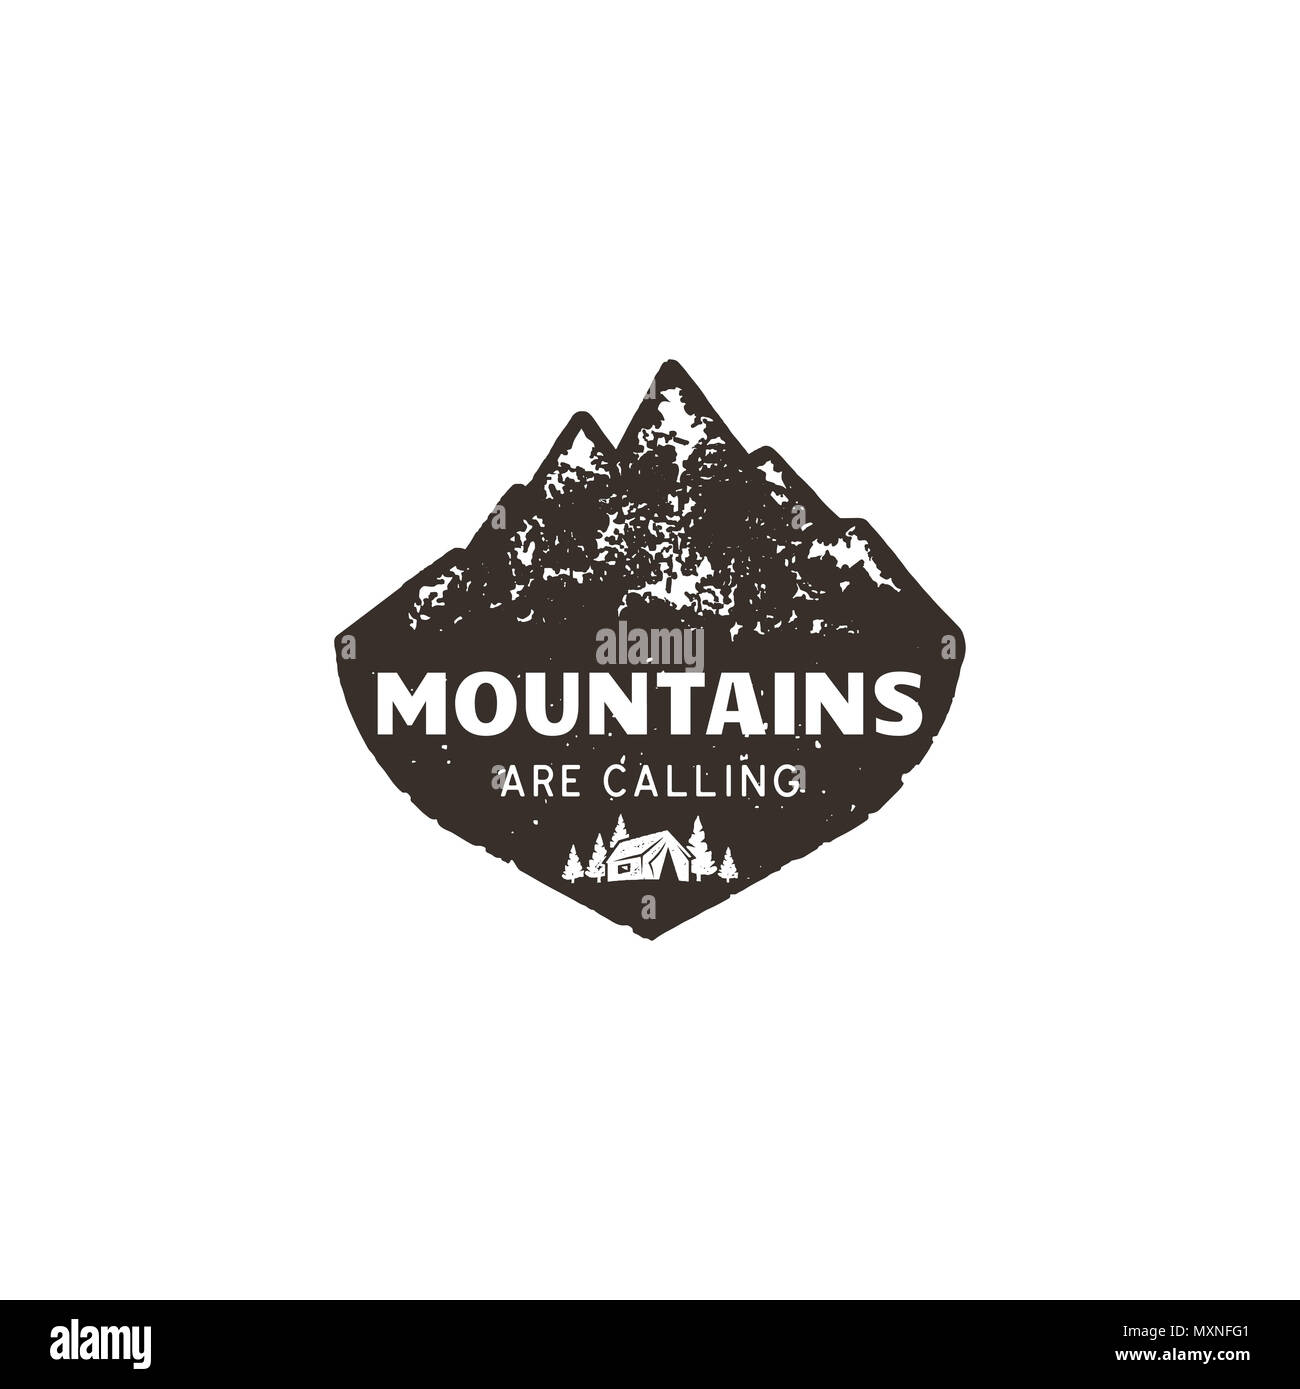 Vintage hand drawn mountain logo. The great outdoor patch. Mountains are calling sign quote. Monochrome and grunge letterpress effect. Stock mountain logo isolate on white background Stock Photo